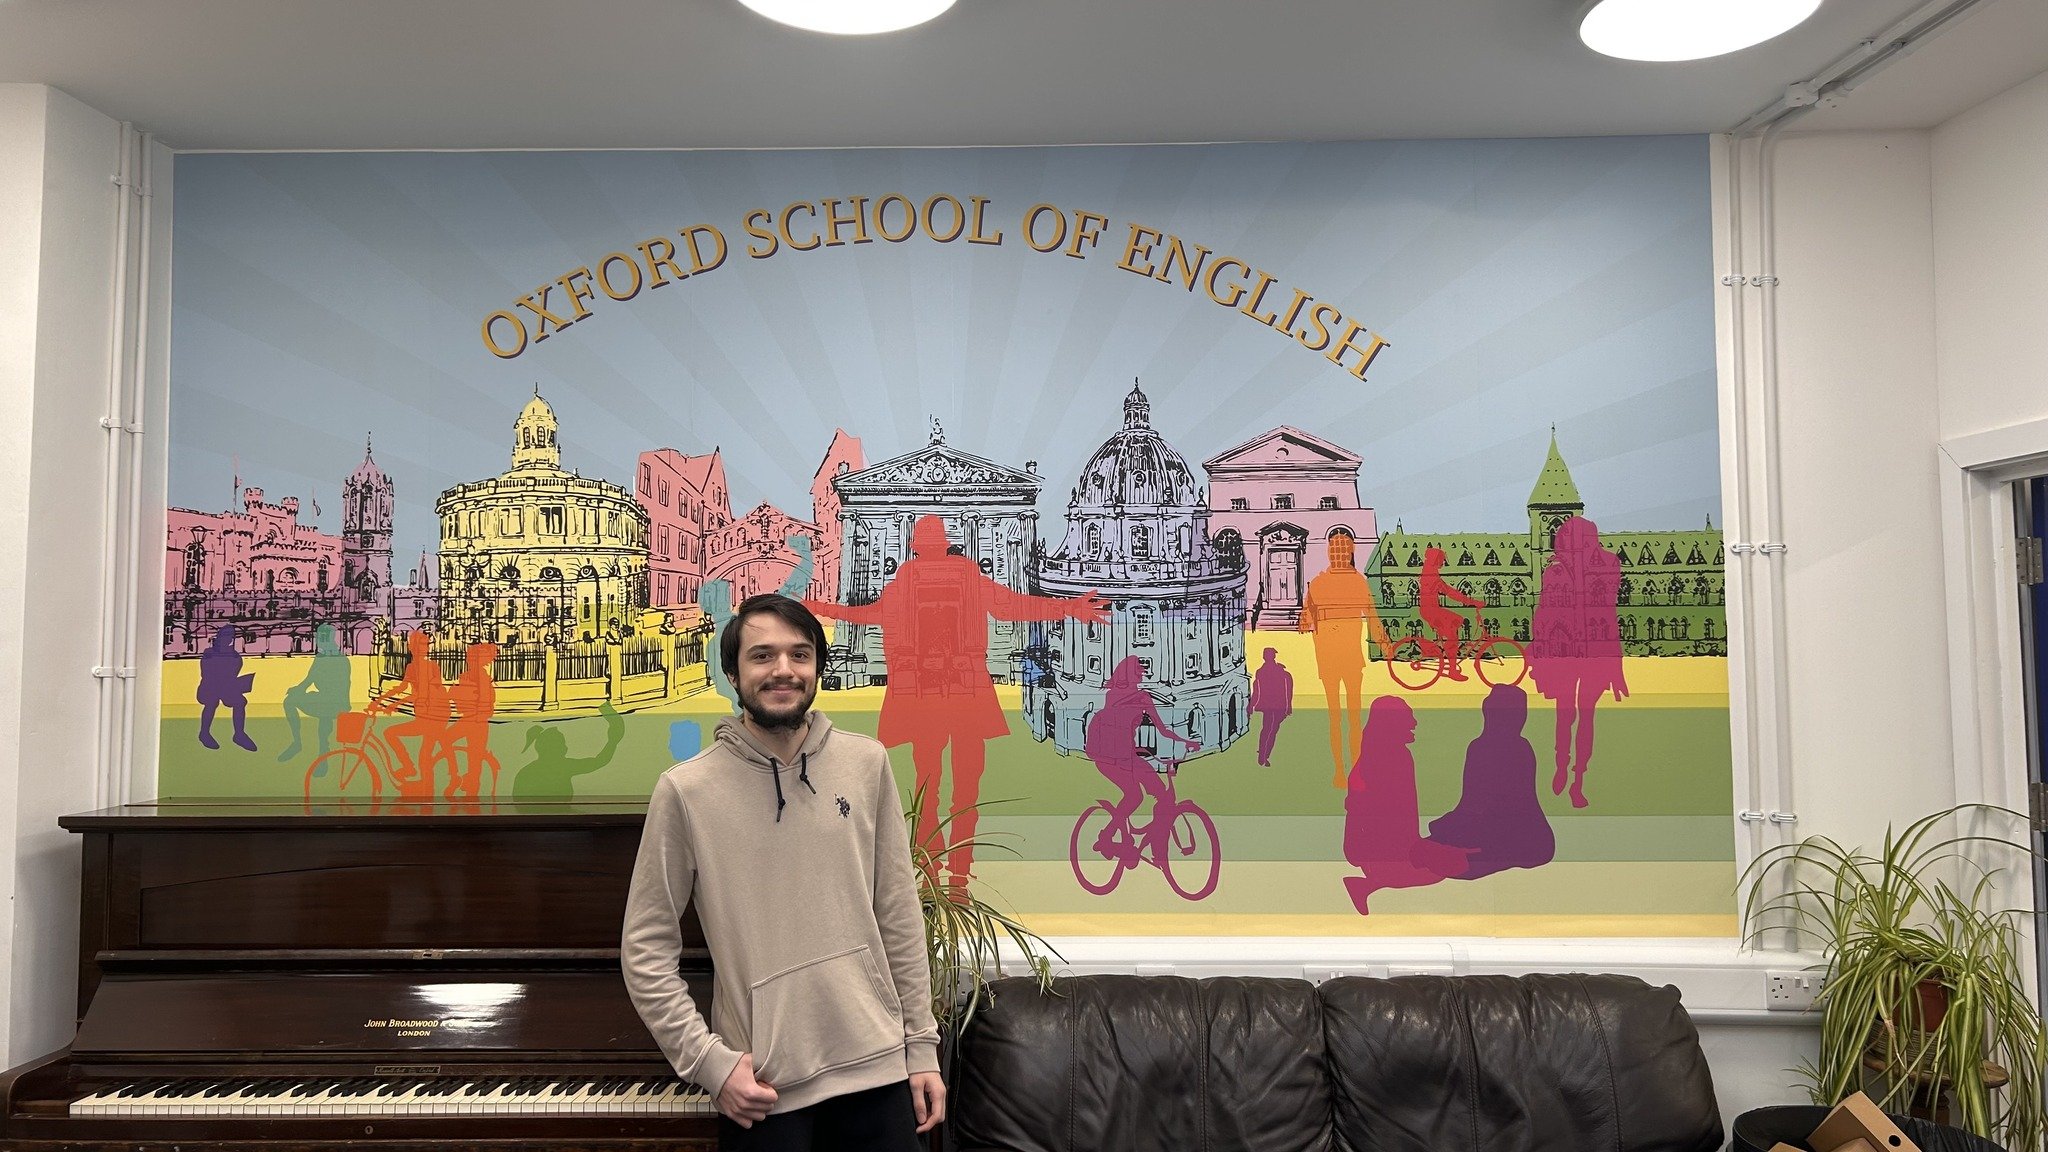 Our new wall mural!😁
Current student from Turkey, Serhan, standing in front of our brand new mural in our common room.
Please tag us if you take any photos in front of this!✨

 #englishoxford #studywithus #studyenglishintheuk #studyabroadyenglish #s